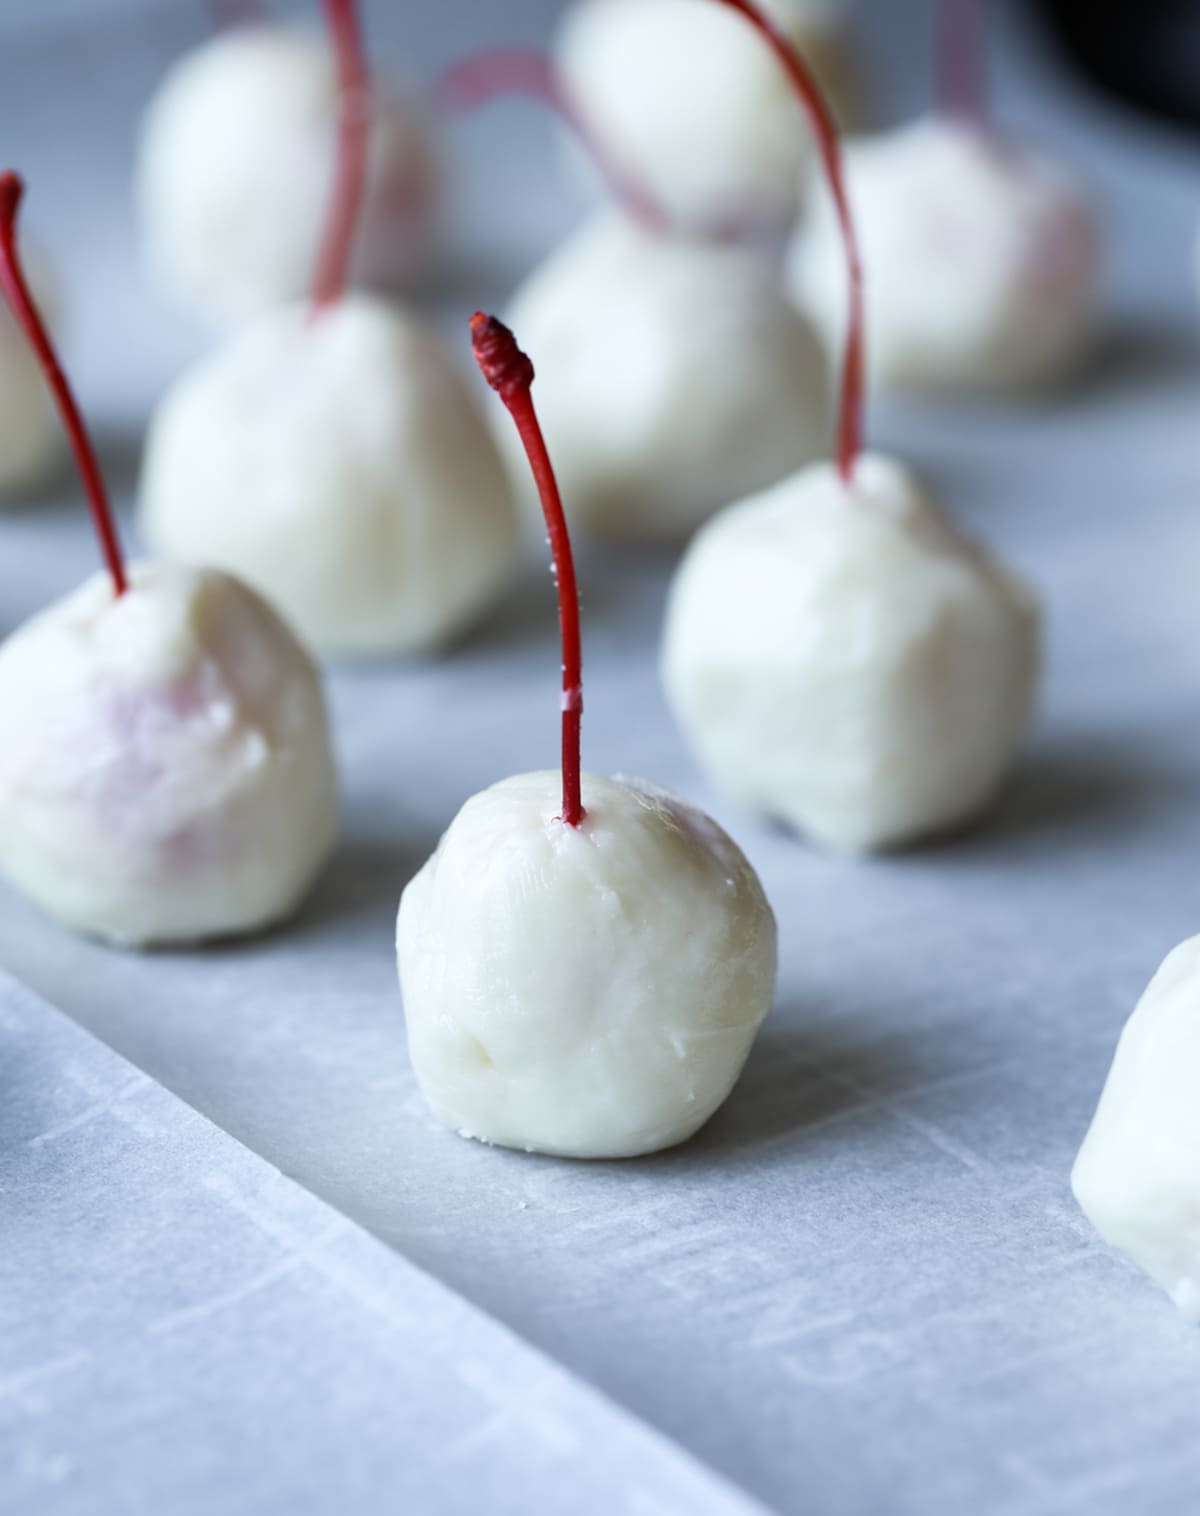 Cherries with a stem coated in white fondant on a parchment lined baking sheet